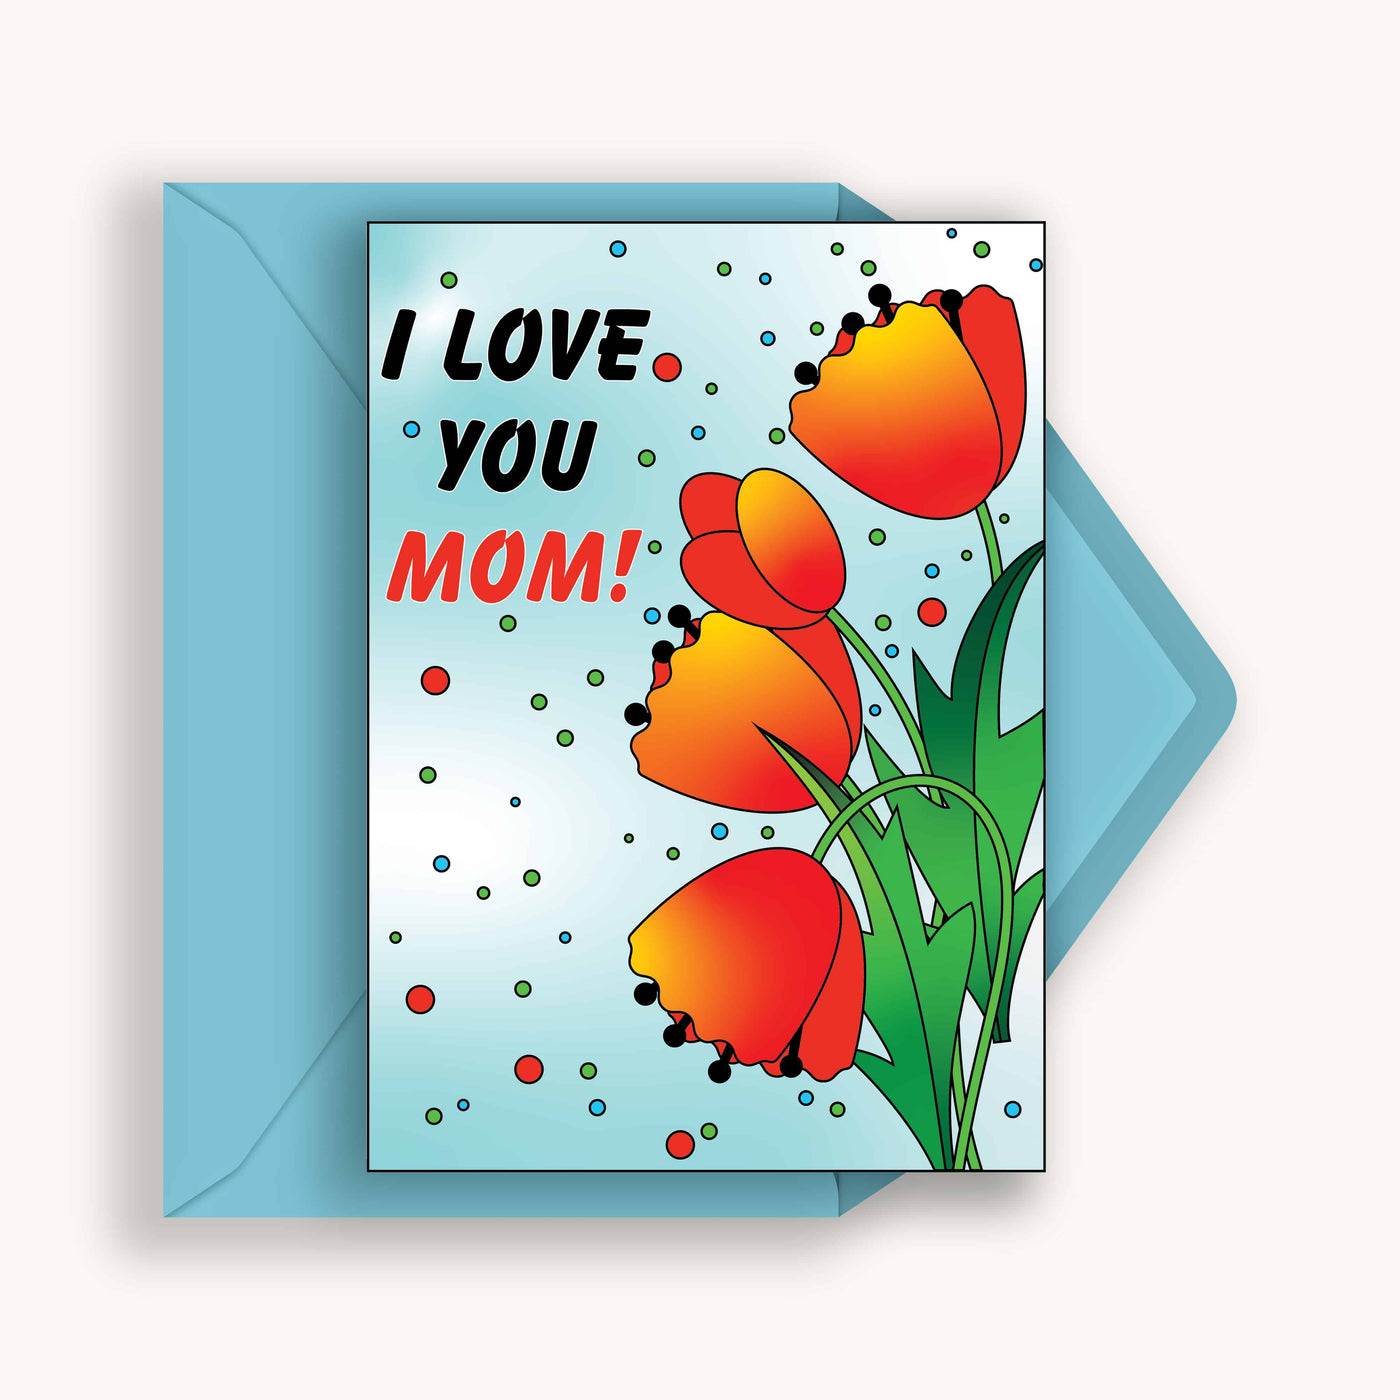 Simpliday Paper by Olga Nagorna Mother's Day Coloring Greeting Card is a meaningful personalized gift to show how much you love your mom.